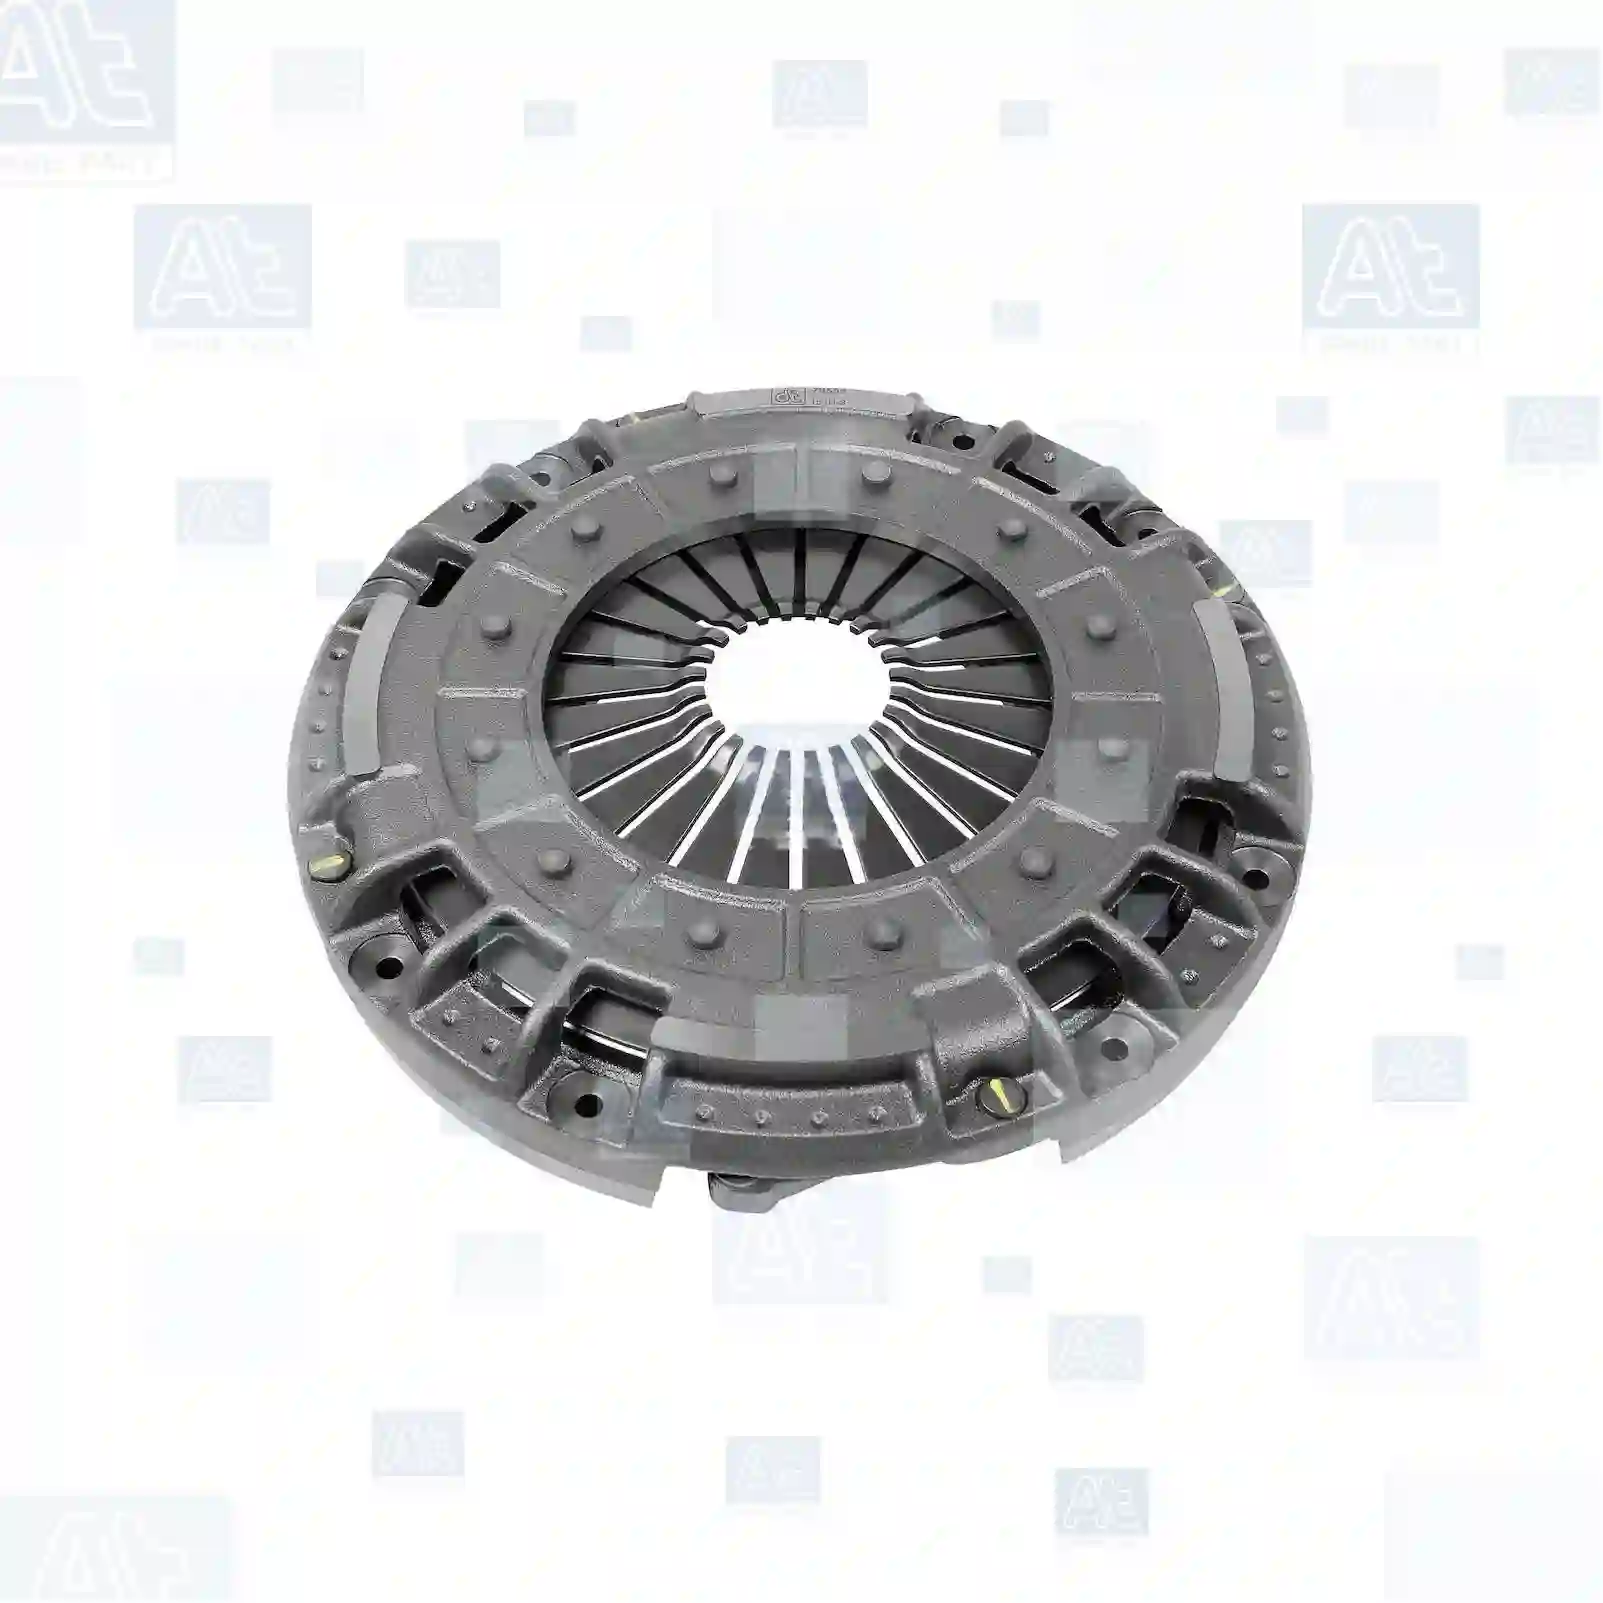 Clutch cover, 77721851, 3244926R91, 01903890, 01904705, 01904772, 06276681, 106276681, 42026354KZ, 42016352, 42026352, 42026354, 42066352, 3141909M1, 01903890, 01904705, 01904772, 1903890, 1904705, 1904772, 42016352, 42026352, 42026354, 42066352, AZ36712, AZY61355, 1212330065000, 0022500080, 0022505404, 0022507104, 002250710480, 0022508704, 002250870480, 0032504004, 0032505404, 0032505904, 0032509904, 003250990480, 8383211000, 8383211000C, 8113237 ||  77721851 At Spare Part | Engine, Accelerator Pedal, Camshaft, Connecting Rod, Crankcase, Crankshaft, Cylinder Head, Engine Suspension Mountings, Exhaust Manifold, Exhaust Gas Recirculation, Filter Kits, Flywheel Housing, General Overhaul Kits, Engine, Intake Manifold, Oil Cleaner, Oil Cooler, Oil Filter, Oil Pump, Oil Sump, Piston & Liner, Sensor & Switch, Timing Case, Turbocharger, Cooling System, Belt Tensioner, Coolant Filter, Coolant Pipe, Corrosion Prevention Agent, Drive, Expansion Tank, Fan, Intercooler, Monitors & Gauges, Radiator, Thermostat, V-Belt / Timing belt, Water Pump, Fuel System, Electronical Injector Unit, Feed Pump, Fuel Filter, cpl., Fuel Gauge Sender,  Fuel Line, Fuel Pump, Fuel Tank, Injection Line Kit, Injection Pump, Exhaust System, Clutch & Pedal, Gearbox, Propeller Shaft, Axles, Brake System, Hubs & Wheels, Suspension, Leaf Spring, Universal Parts / Accessories, Steering, Electrical System, Cabin Clutch cover, 77721851, 3244926R91, 01903890, 01904705, 01904772, 06276681, 106276681, 42026354KZ, 42016352, 42026352, 42026354, 42066352, 3141909M1, 01903890, 01904705, 01904772, 1903890, 1904705, 1904772, 42016352, 42026352, 42026354, 42066352, AZ36712, AZY61355, 1212330065000, 0022500080, 0022505404, 0022507104, 002250710480, 0022508704, 002250870480, 0032504004, 0032505404, 0032505904, 0032509904, 003250990480, 8383211000, 8383211000C, 8113237 ||  77721851 At Spare Part | Engine, Accelerator Pedal, Camshaft, Connecting Rod, Crankcase, Crankshaft, Cylinder Head, Engine Suspension Mountings, Exhaust Manifold, Exhaust Gas Recirculation, Filter Kits, Flywheel Housing, General Overhaul Kits, Engine, Intake Manifold, Oil Cleaner, Oil Cooler, Oil Filter, Oil Pump, Oil Sump, Piston & Liner, Sensor & Switch, Timing Case, Turbocharger, Cooling System, Belt Tensioner, Coolant Filter, Coolant Pipe, Corrosion Prevention Agent, Drive, Expansion Tank, Fan, Intercooler, Monitors & Gauges, Radiator, Thermostat, V-Belt / Timing belt, Water Pump, Fuel System, Electronical Injector Unit, Feed Pump, Fuel Filter, cpl., Fuel Gauge Sender,  Fuel Line, Fuel Pump, Fuel Tank, Injection Line Kit, Injection Pump, Exhaust System, Clutch & Pedal, Gearbox, Propeller Shaft, Axles, Brake System, Hubs & Wheels, Suspension, Leaf Spring, Universal Parts / Accessories, Steering, Electrical System, Cabin